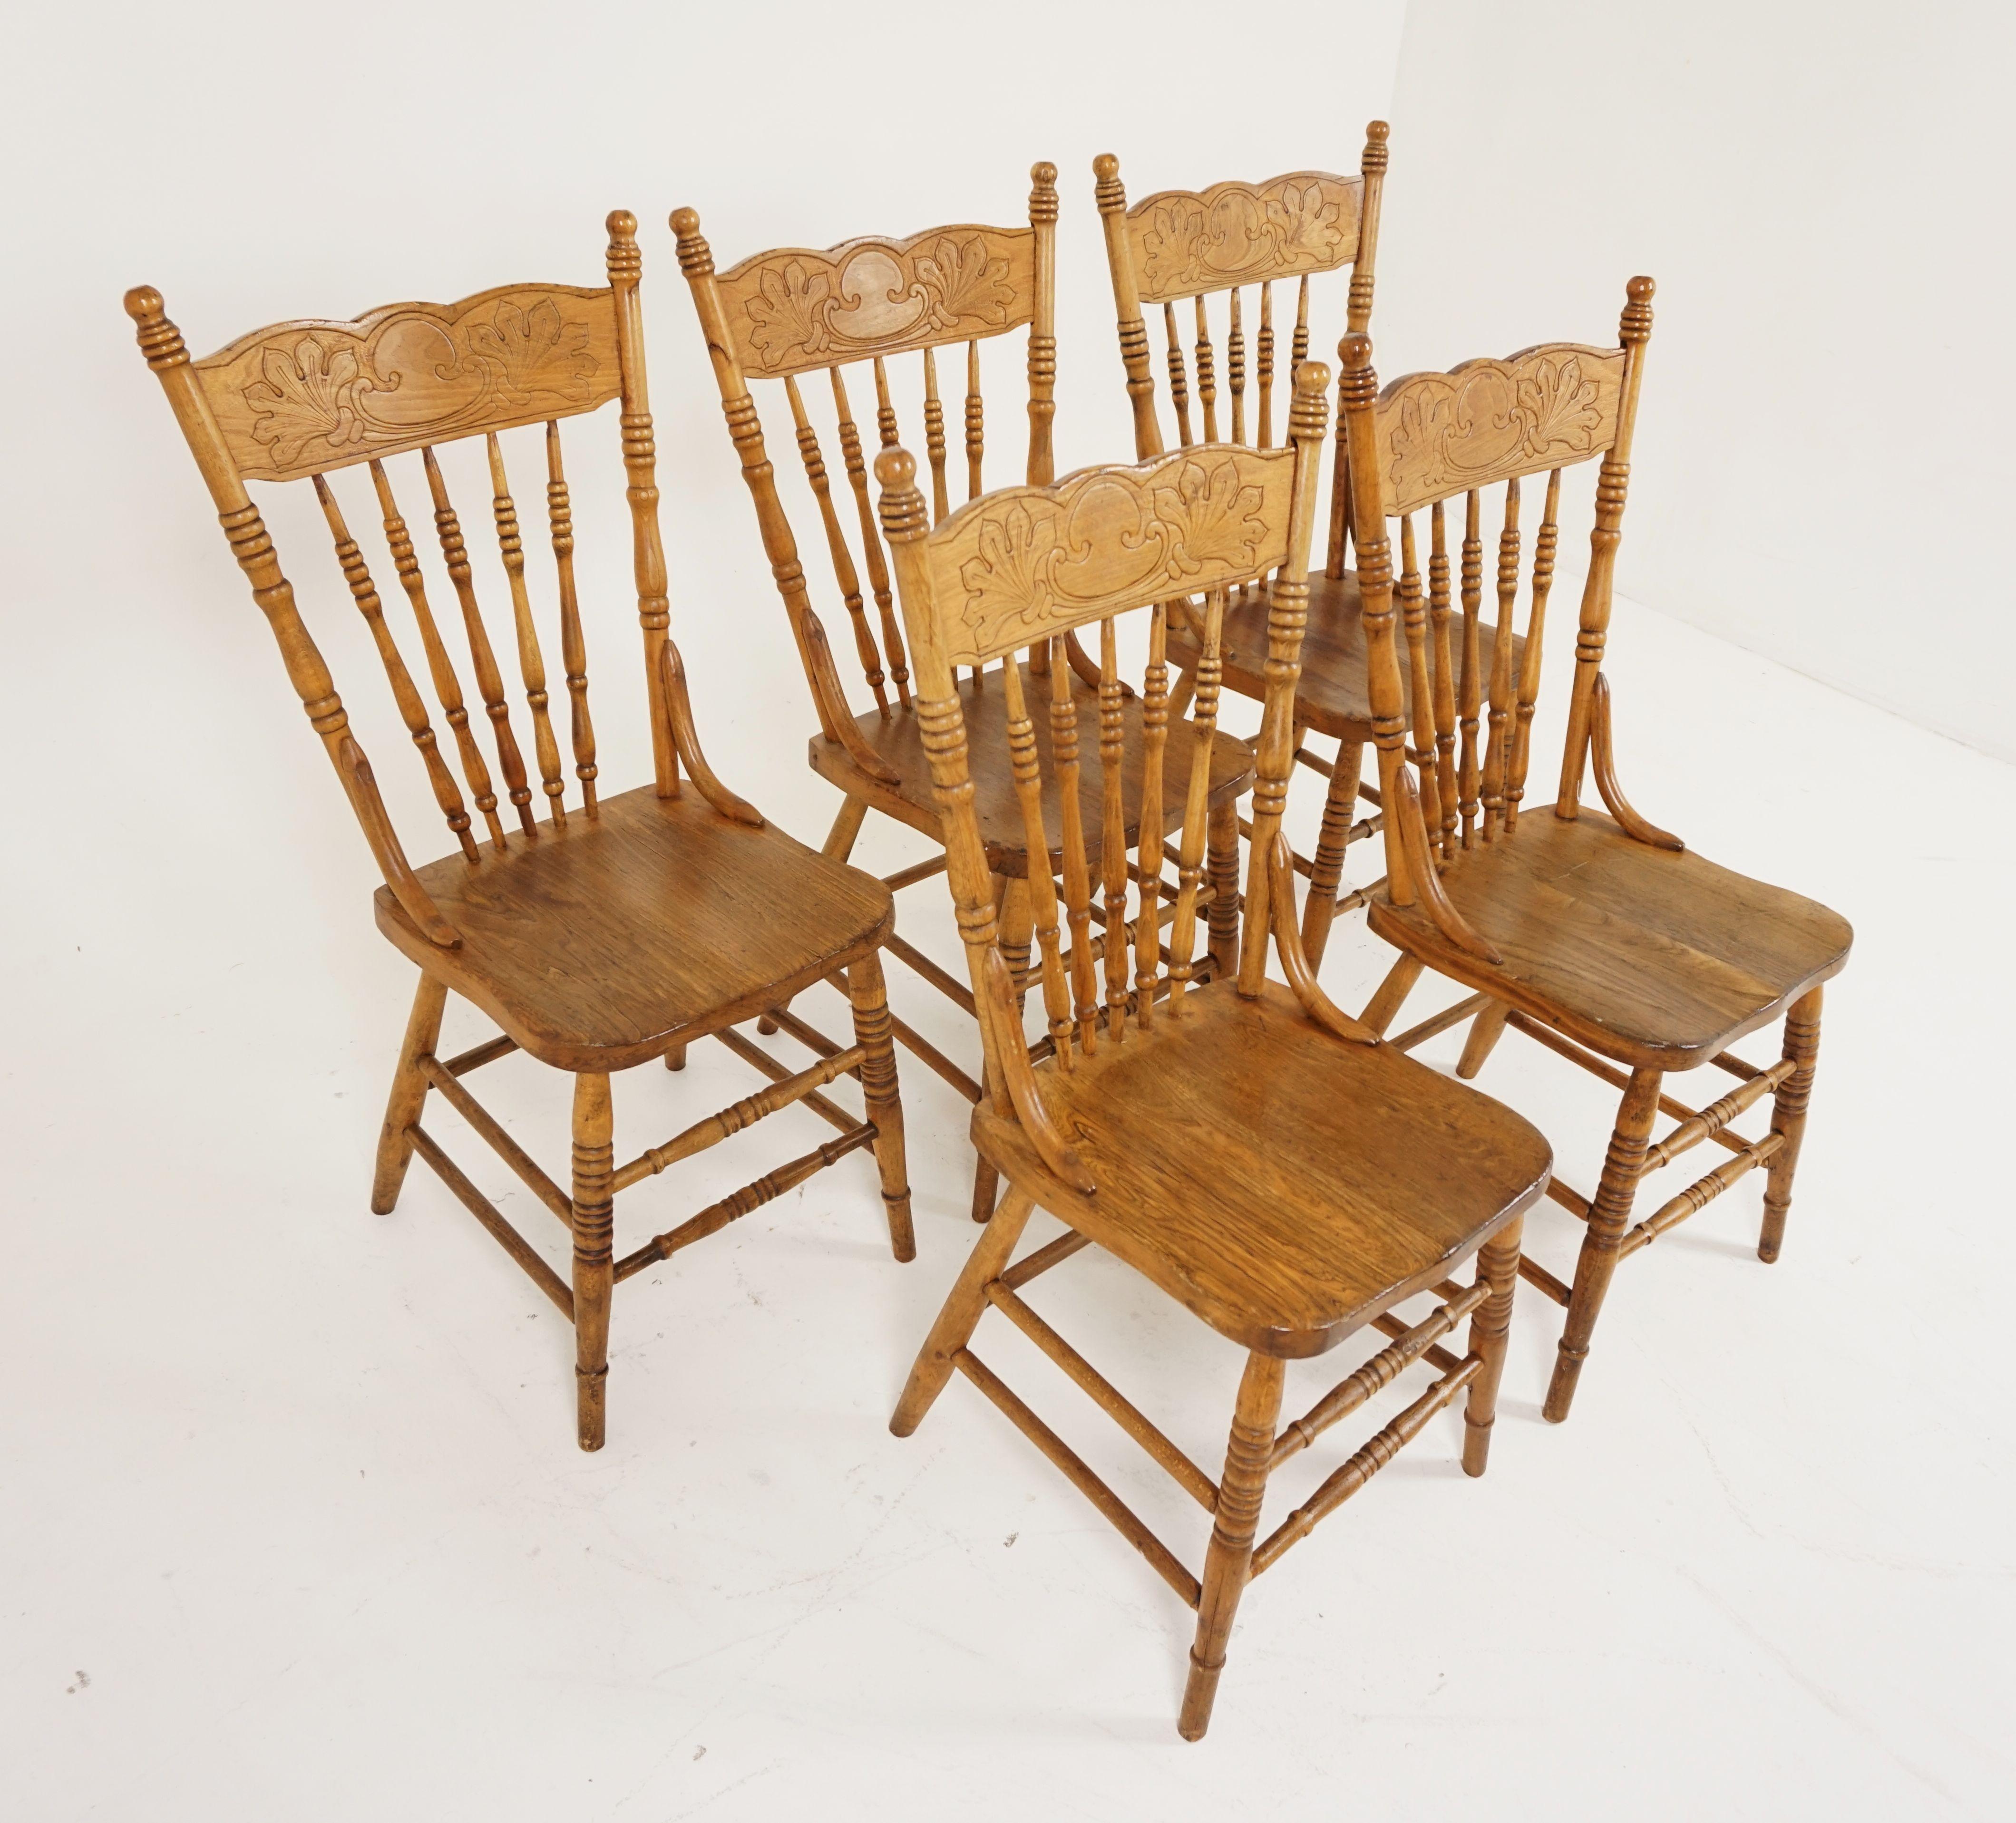 Antique chairs, set of five, matching ash Presstack chairs, solid seats, American 1900, B2066

American, 1900
Solid ash construction
Carved top rail with finials on top
Five turned spindles underneath
Solid ash wooden seat
Standing on four